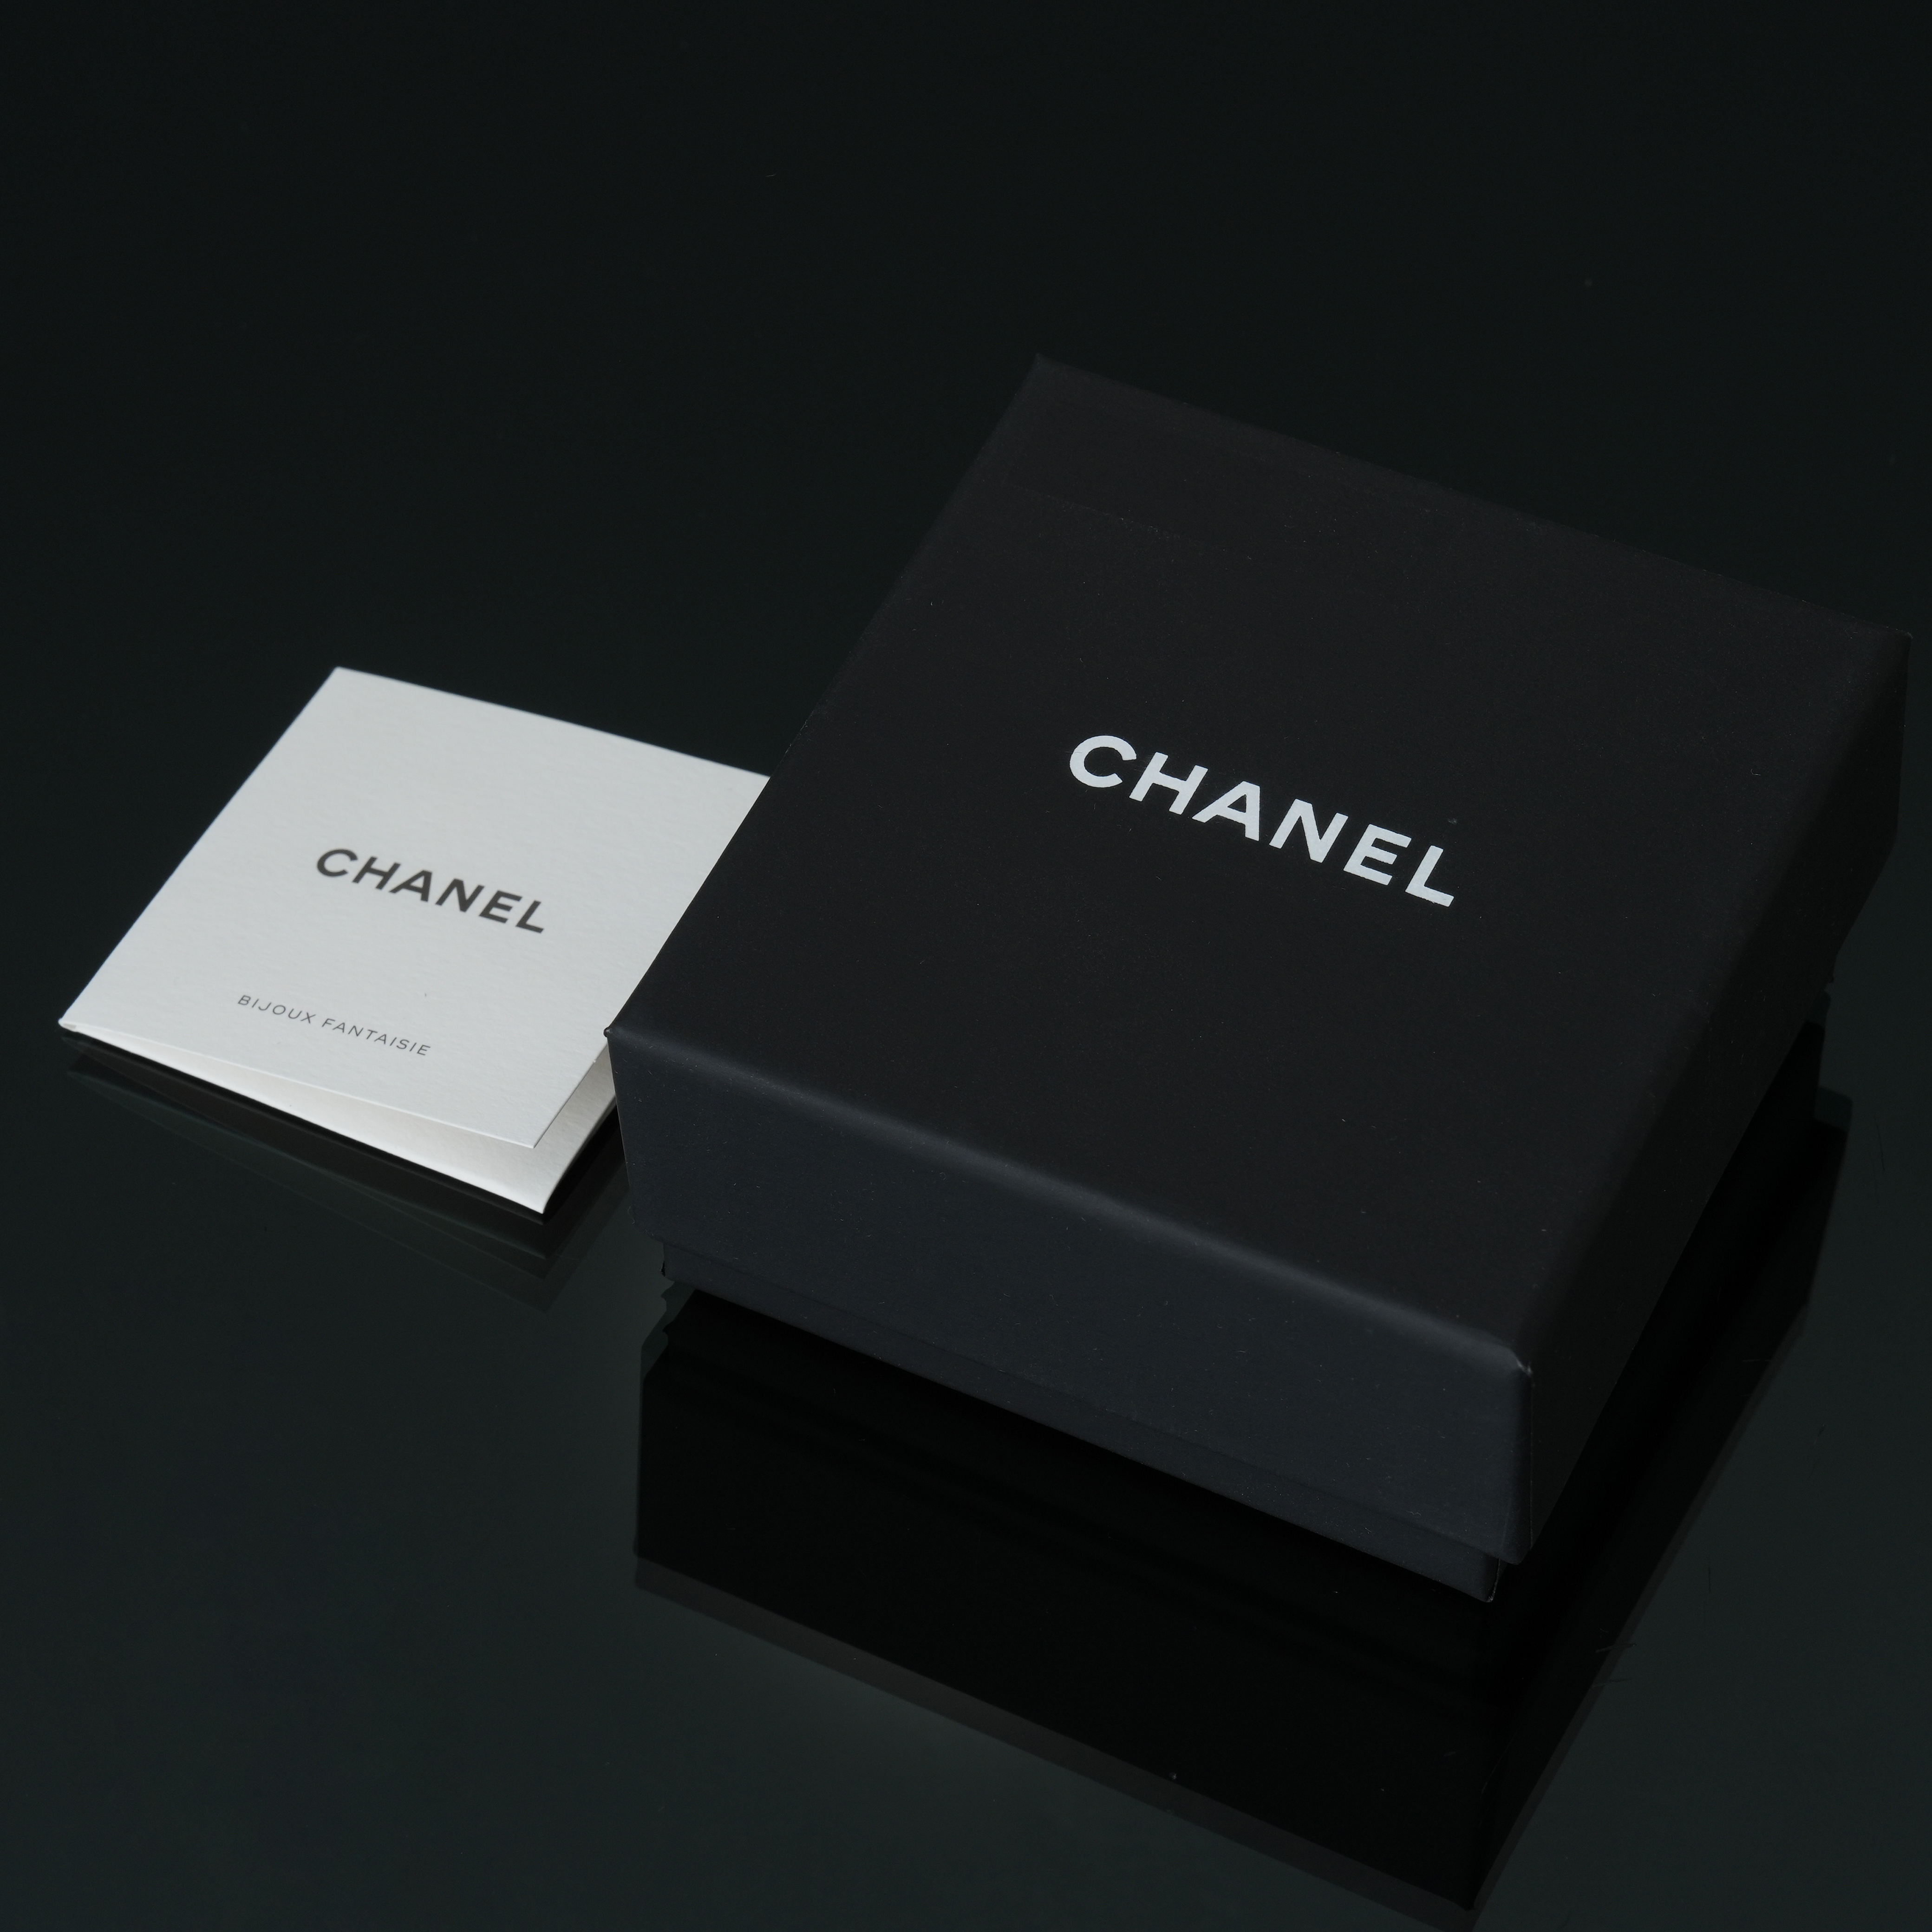 CHANEL(NEW)샤넬 진주 레터링 귀걸이(새상품) NEW PRODUCT